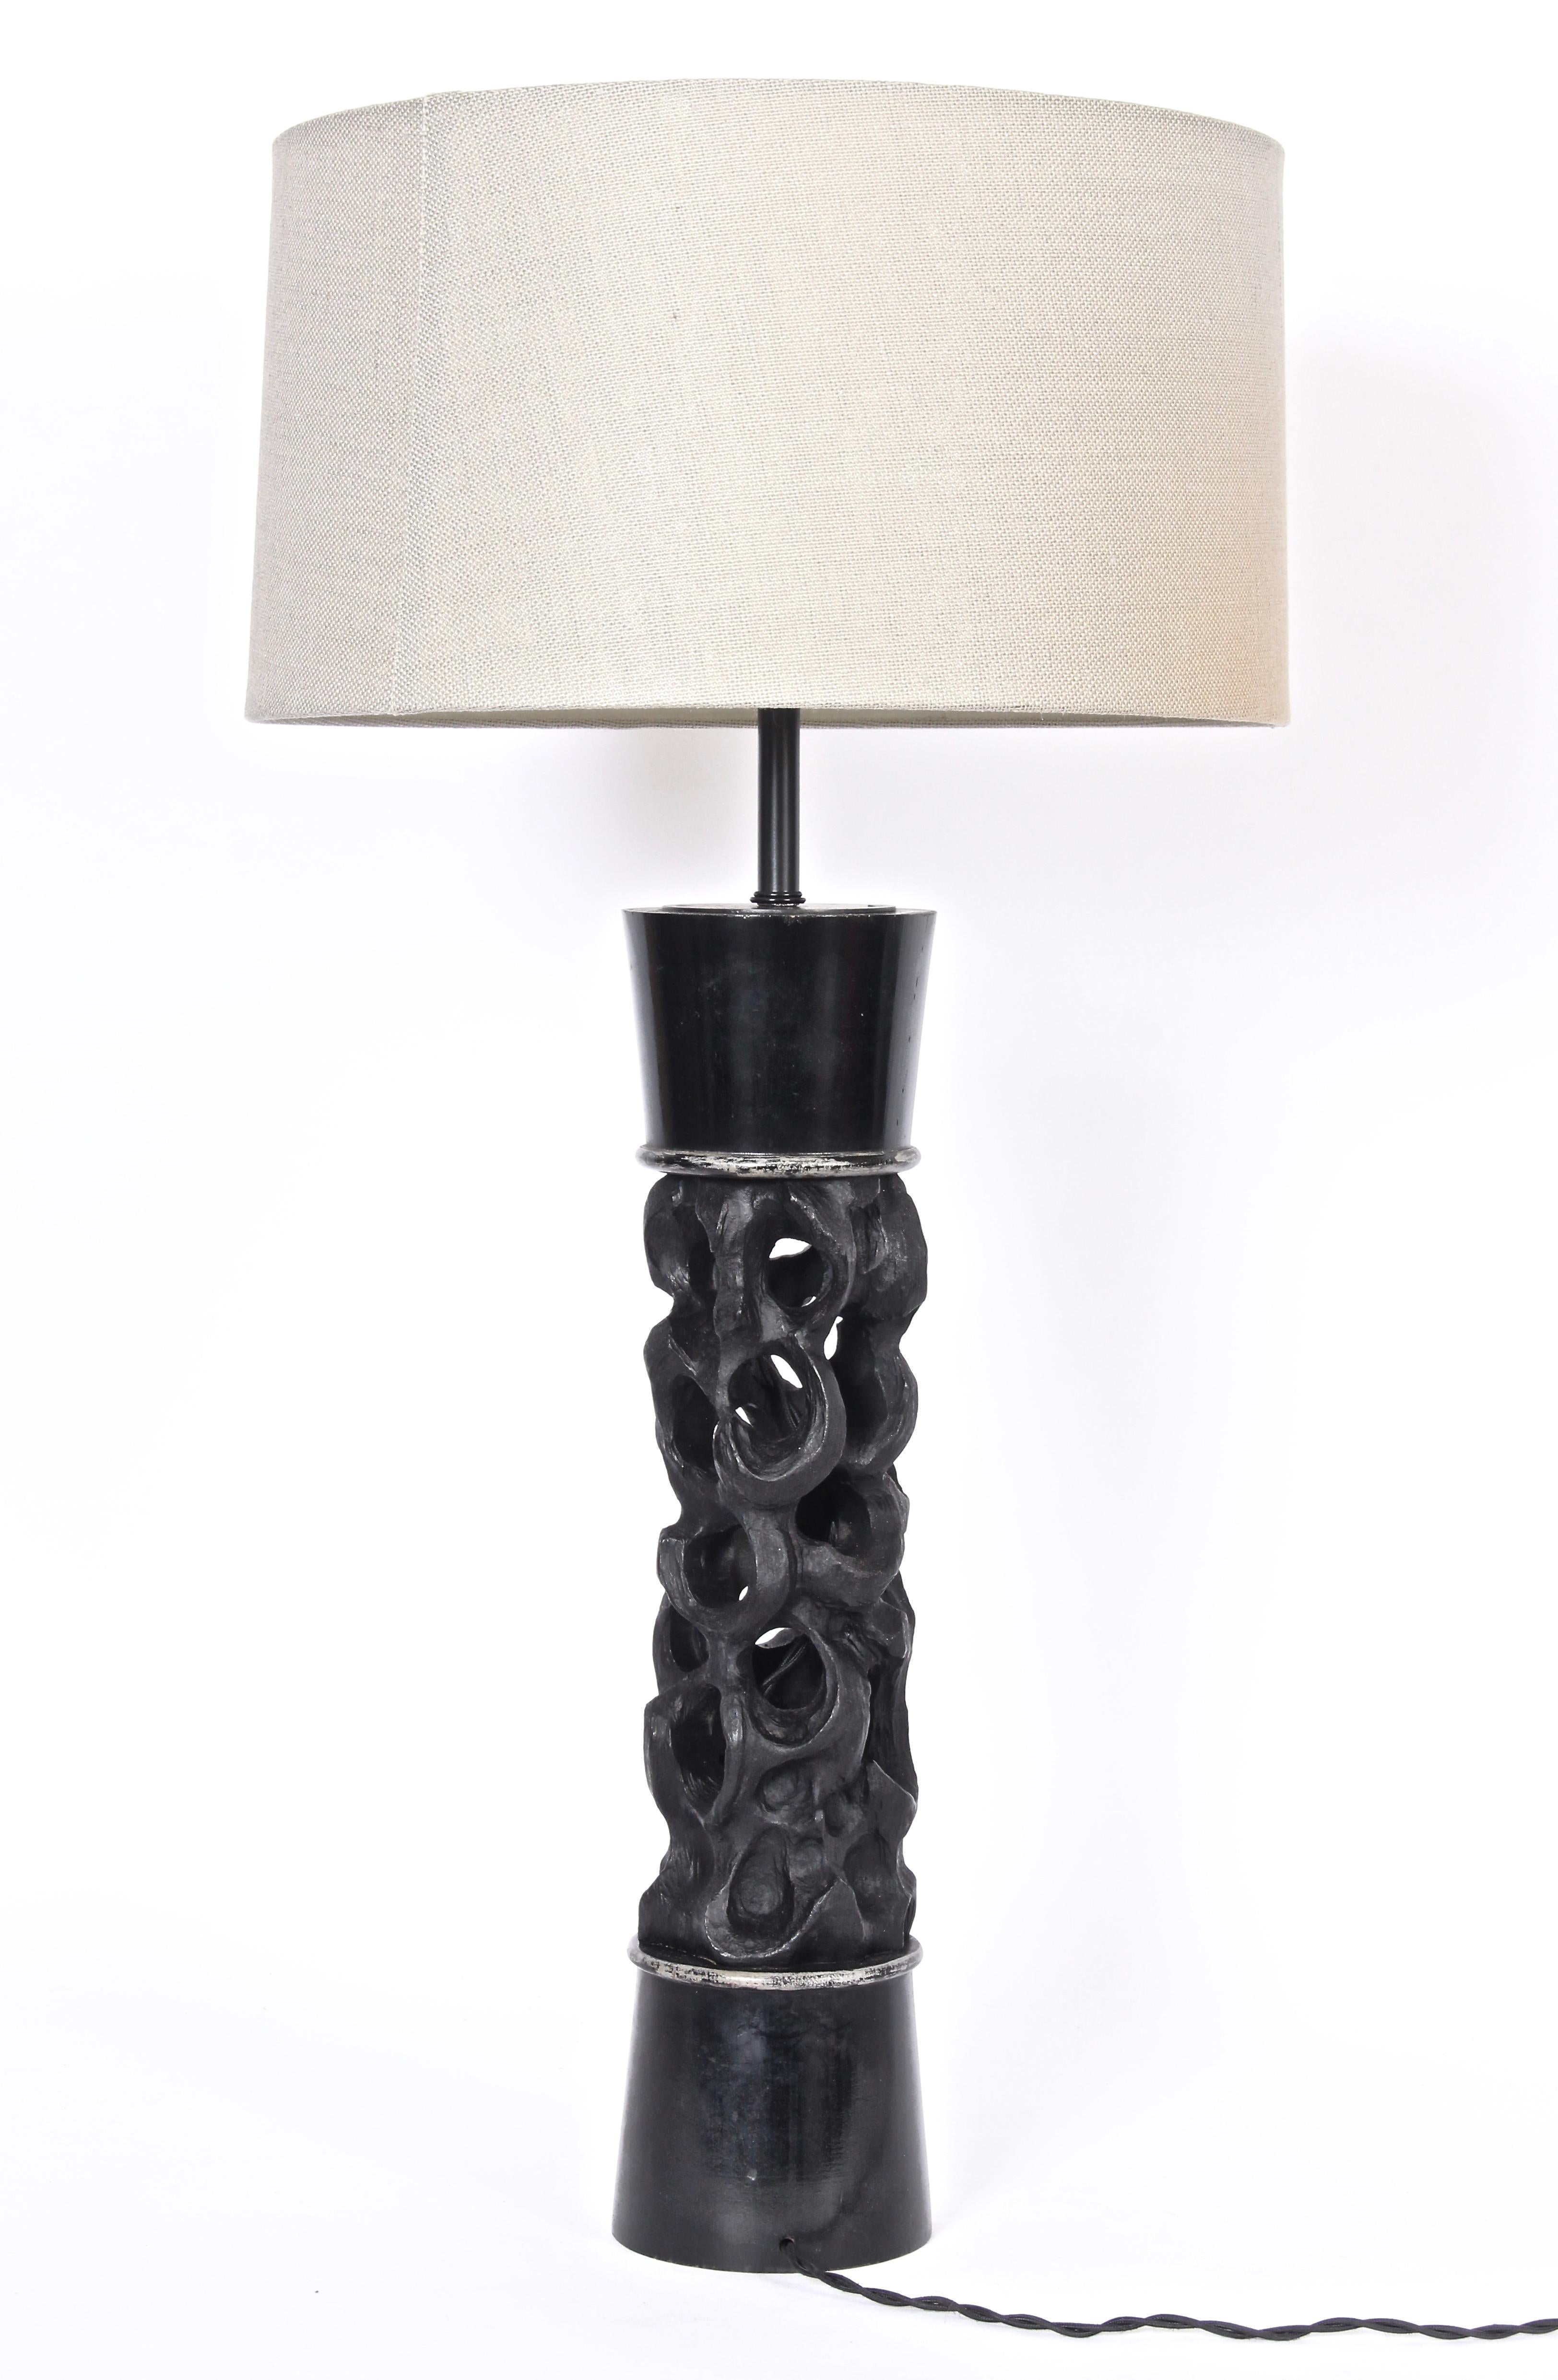 Monumental Handcrafted James Mont Table Lamp.  Featuring a slight hourglass form in blackened carved wood with silvered details. Small footprint. Shade shown for display only (10 H x 17 D top x 18 D bottom).  Adjustable double sockets. 34 H to top